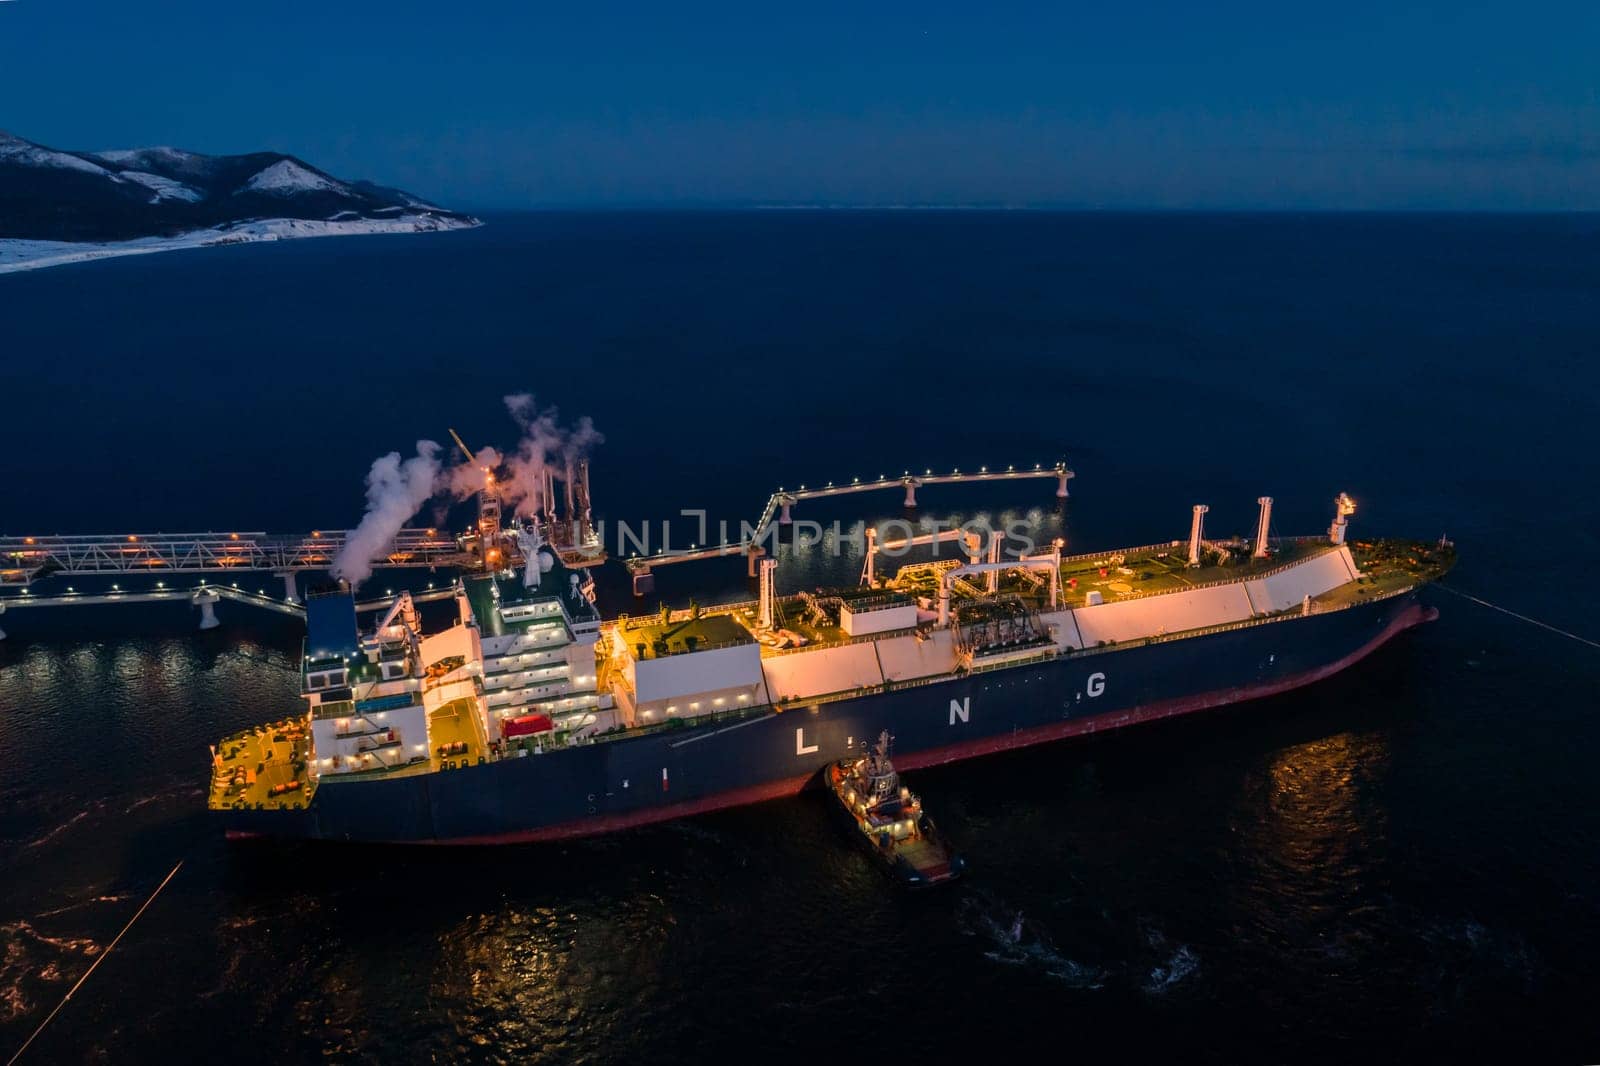 A large LNG tanker docks at an industrial port terminal for cargo operations at dusk